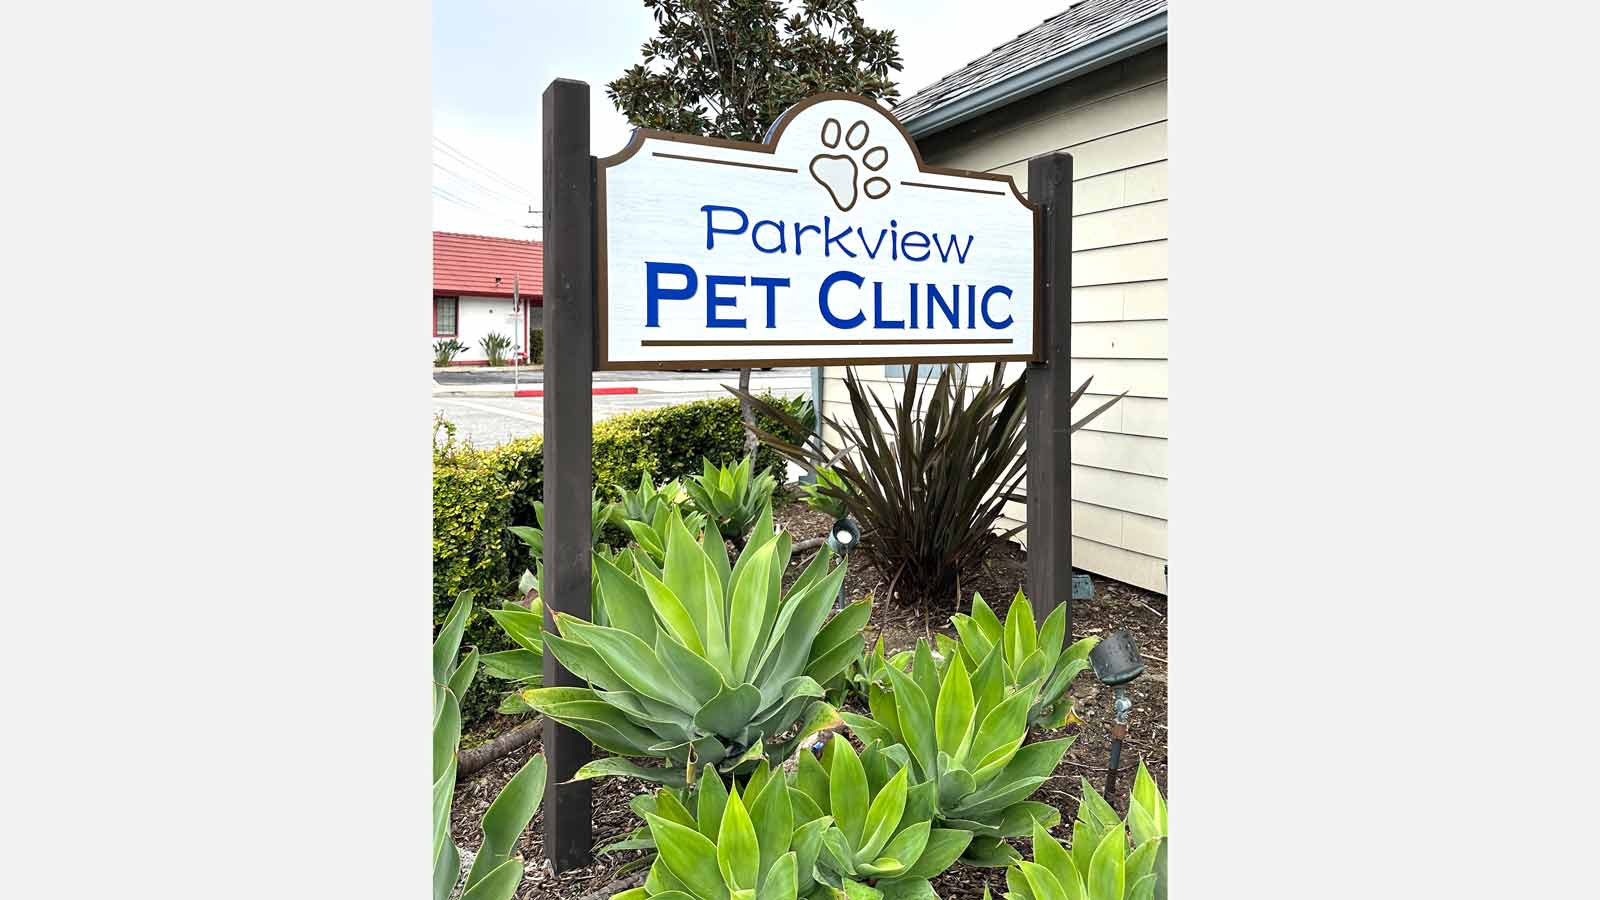 parkview pet clinic pylon sign installed outdoors